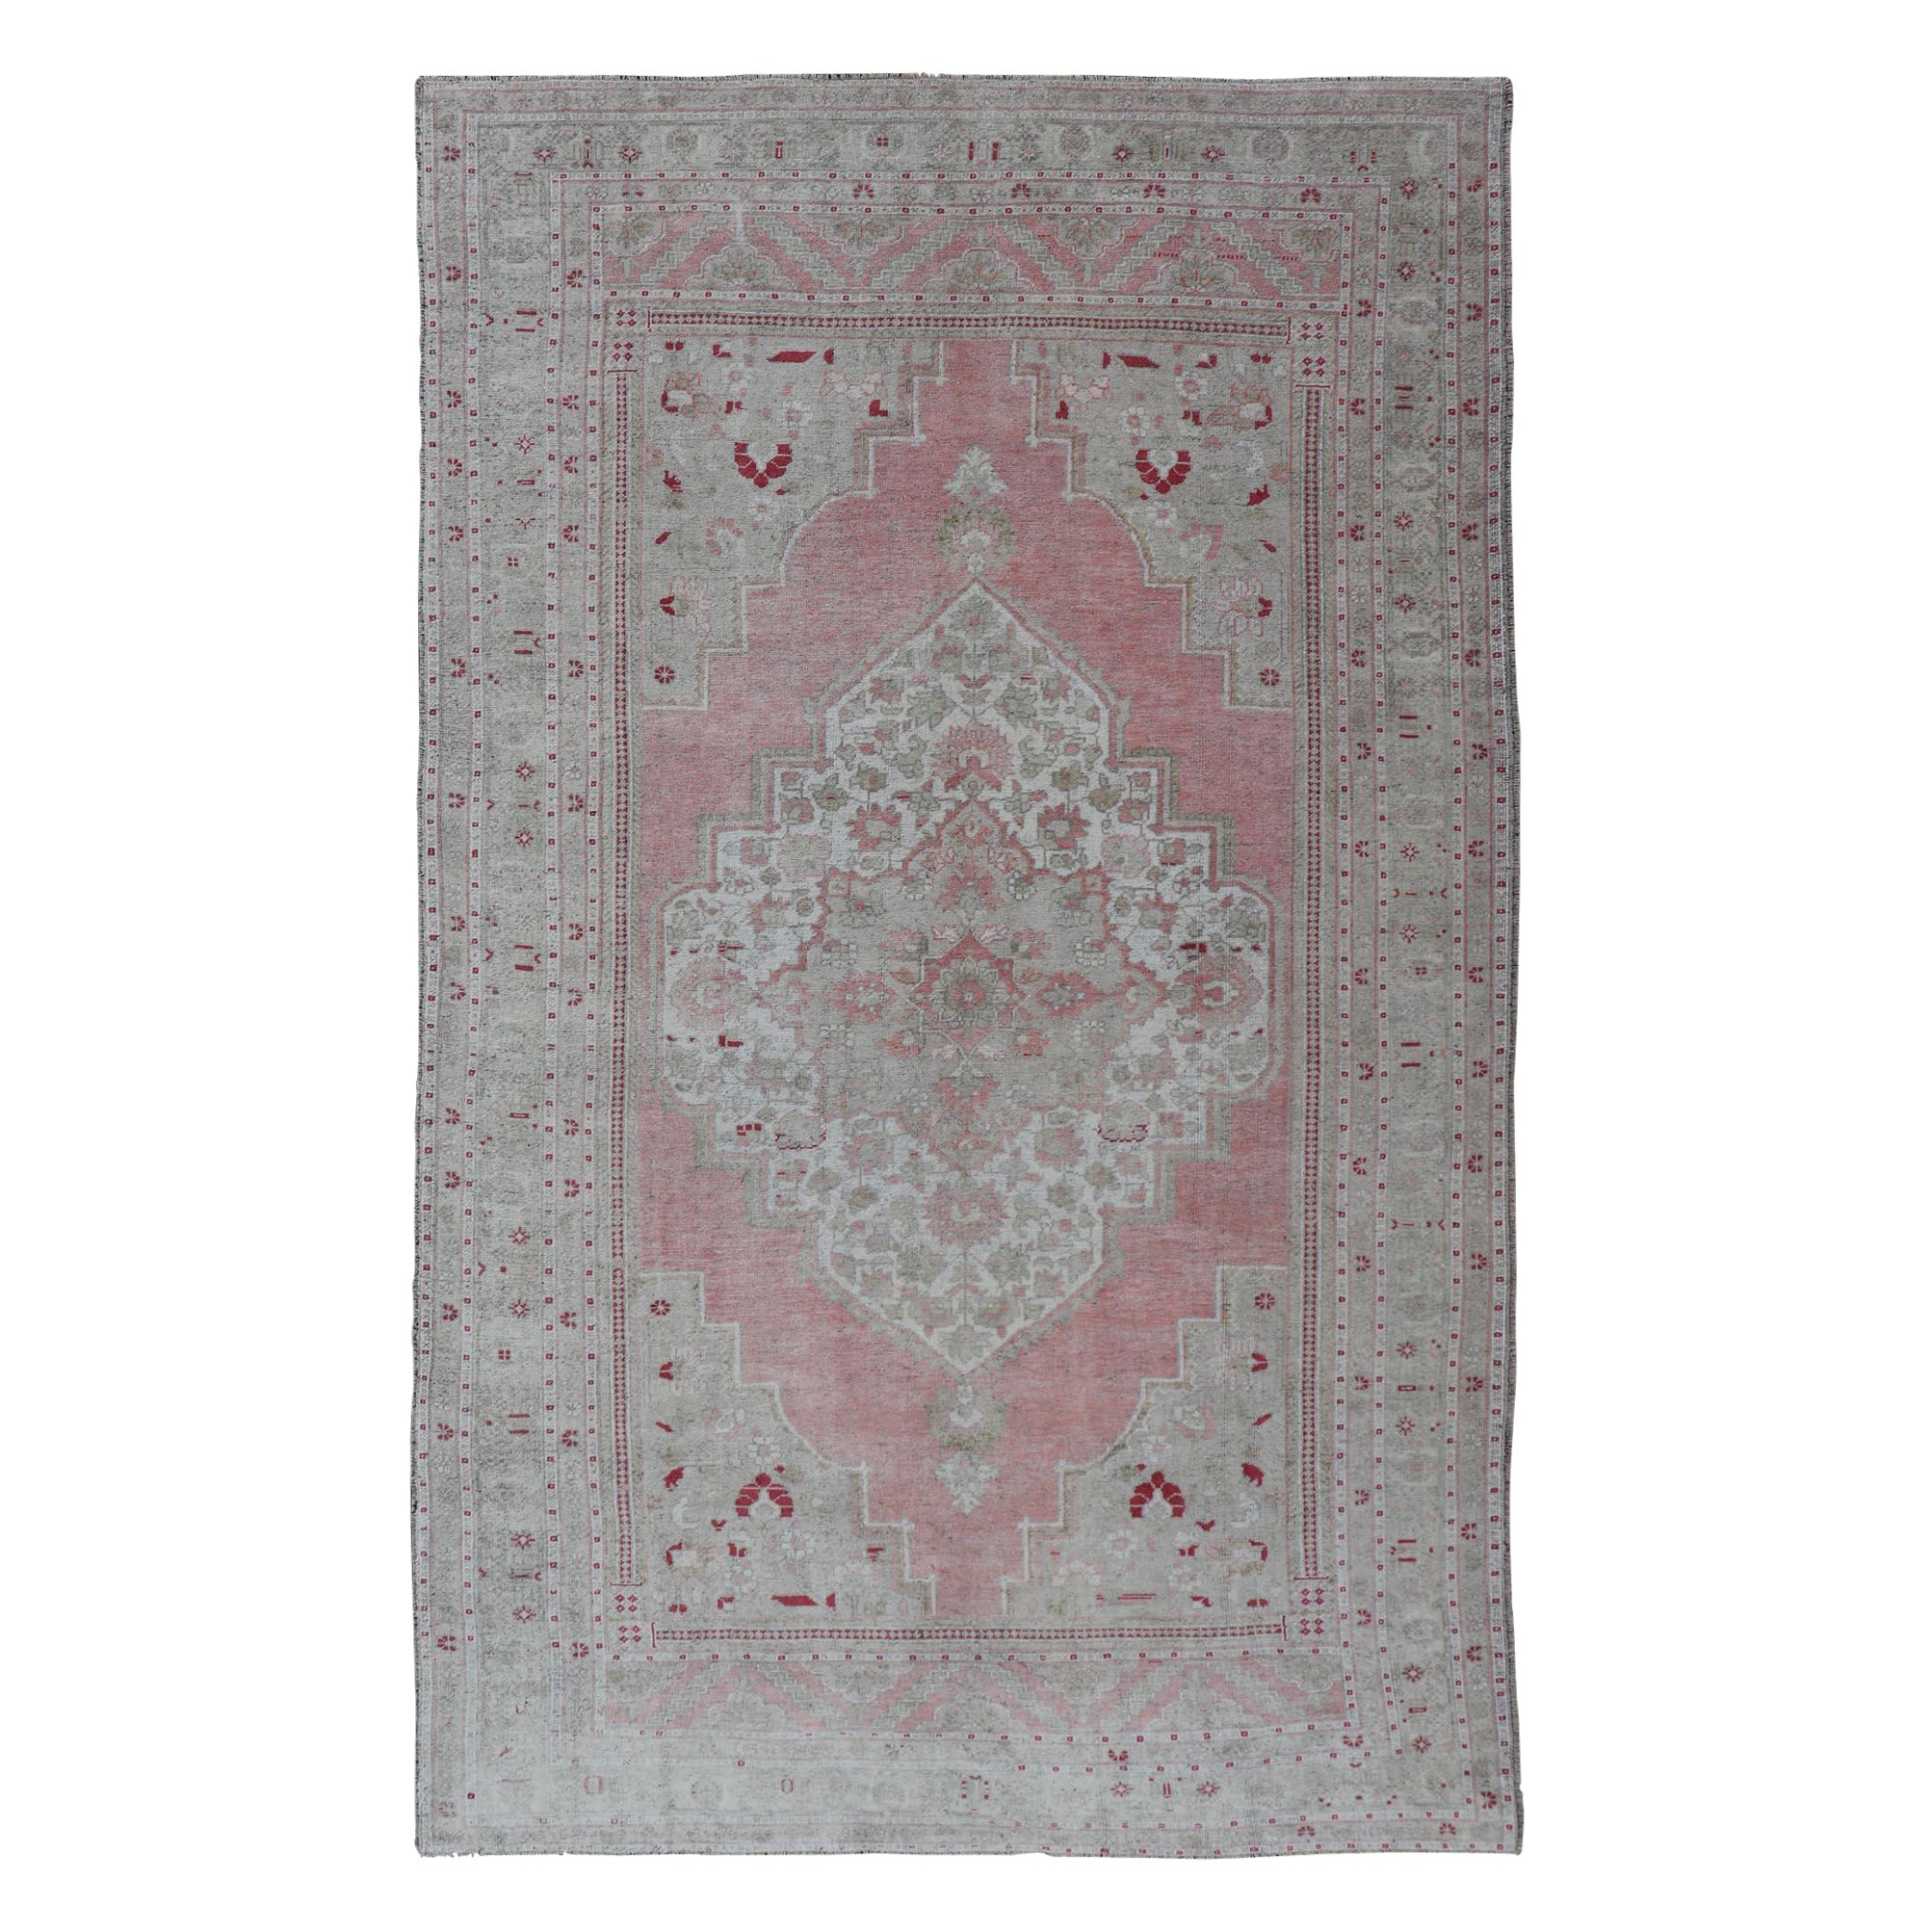 Turkish Vintage Oushak Rug with Geometric Design With A Soft Coral Color